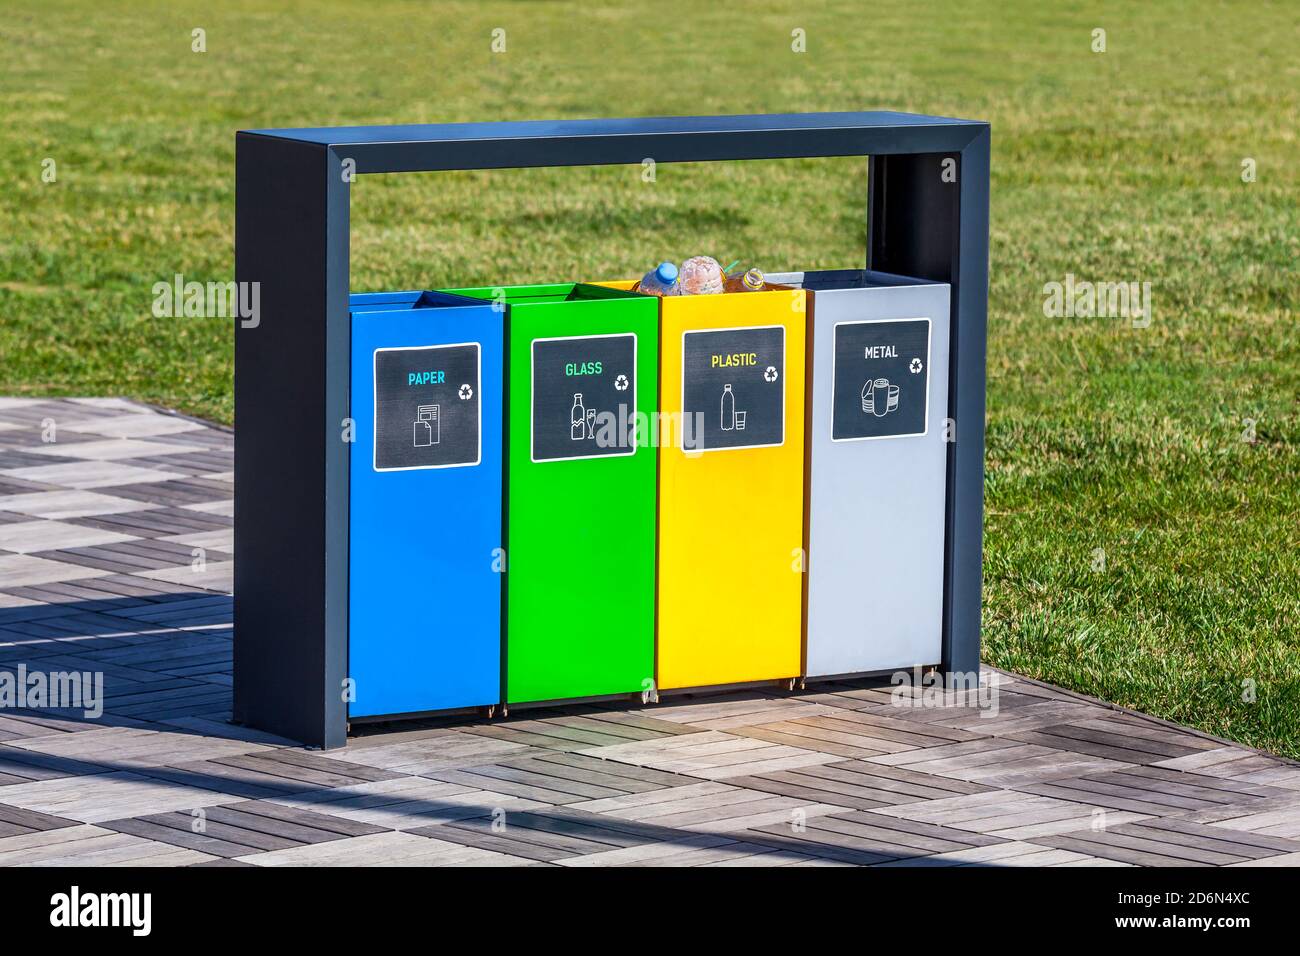 Colorful metal recycle bins in the park Stock Photo